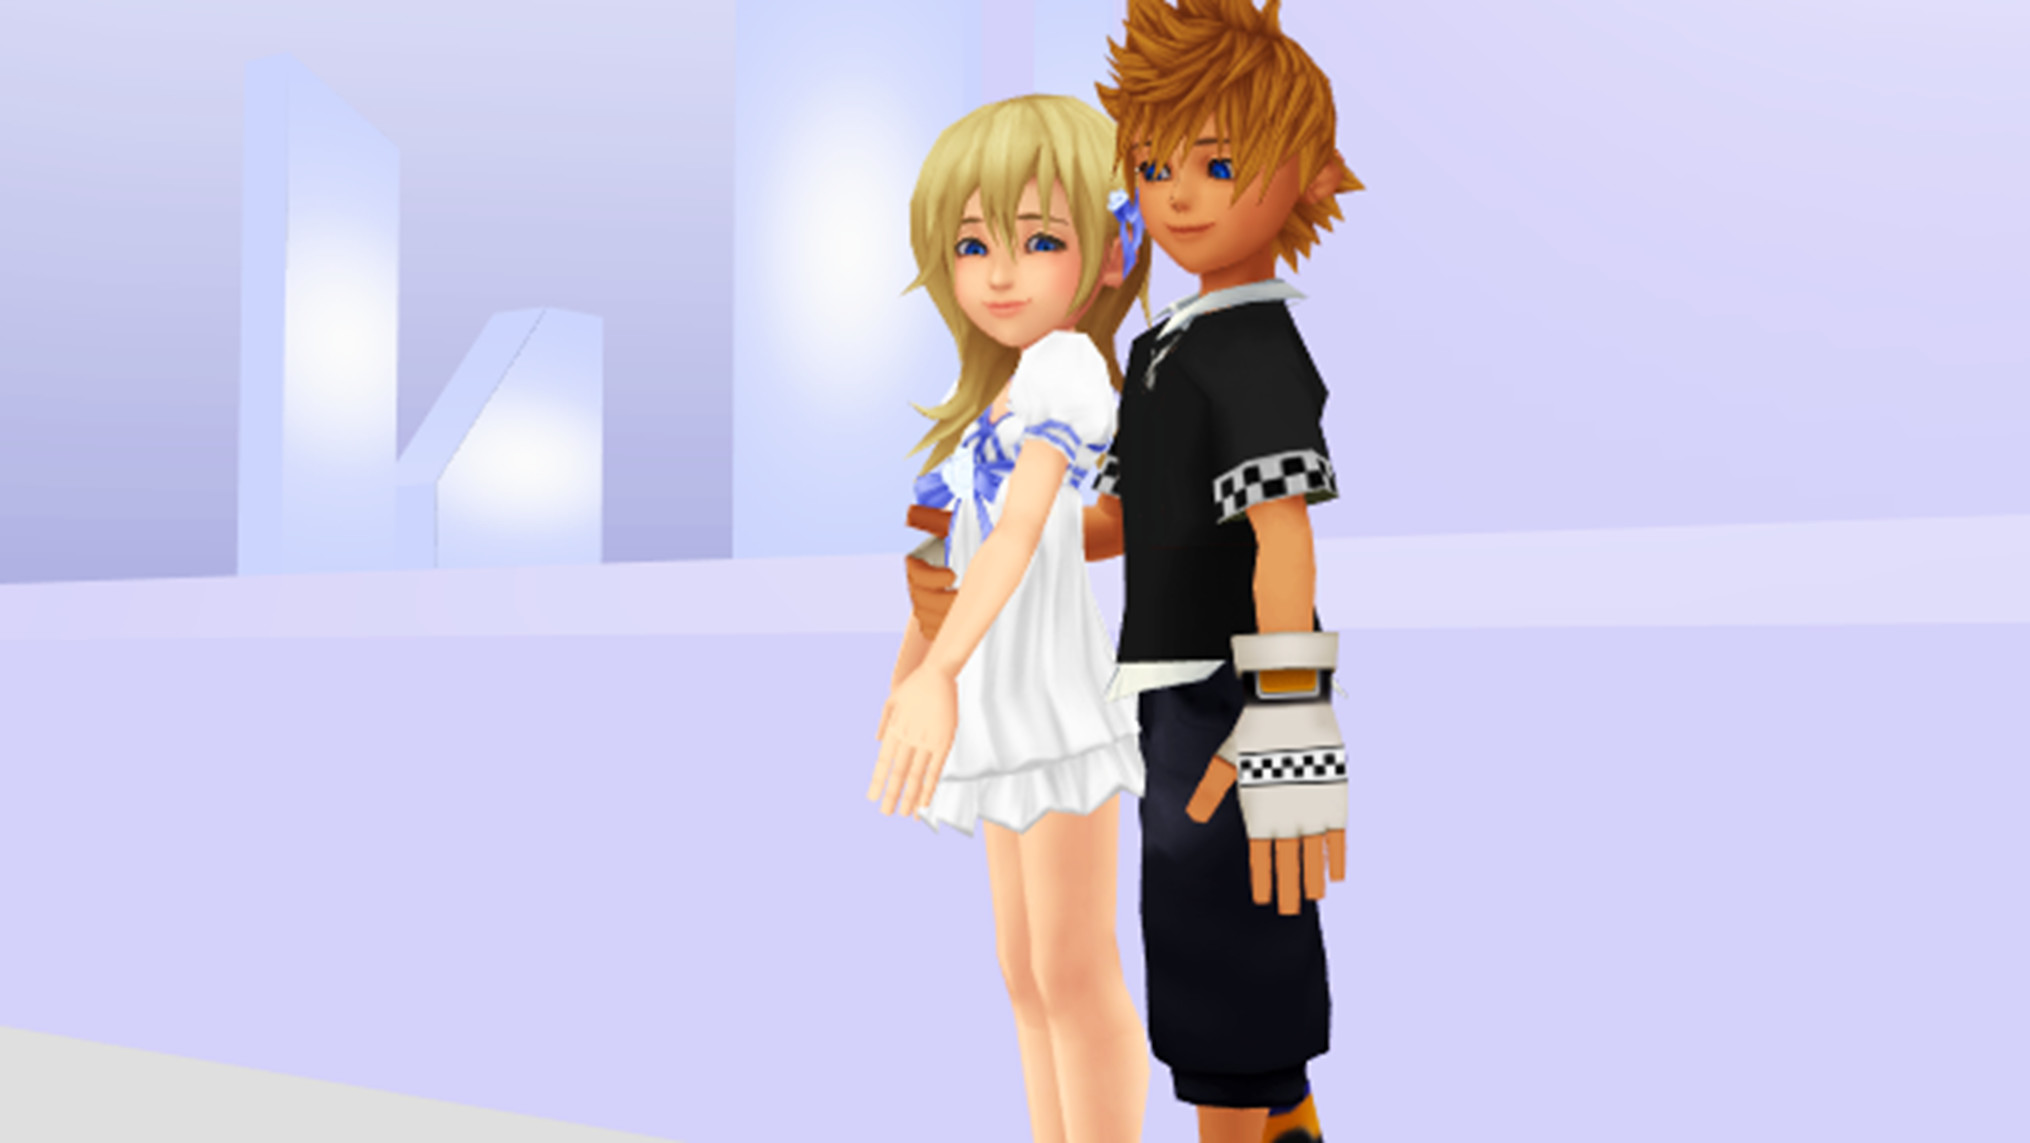 2030x1143 Roxas and Namine images Roxas and Namine KHCoM and KHCoded Your My Shadow.  HD wallpaper and background photos